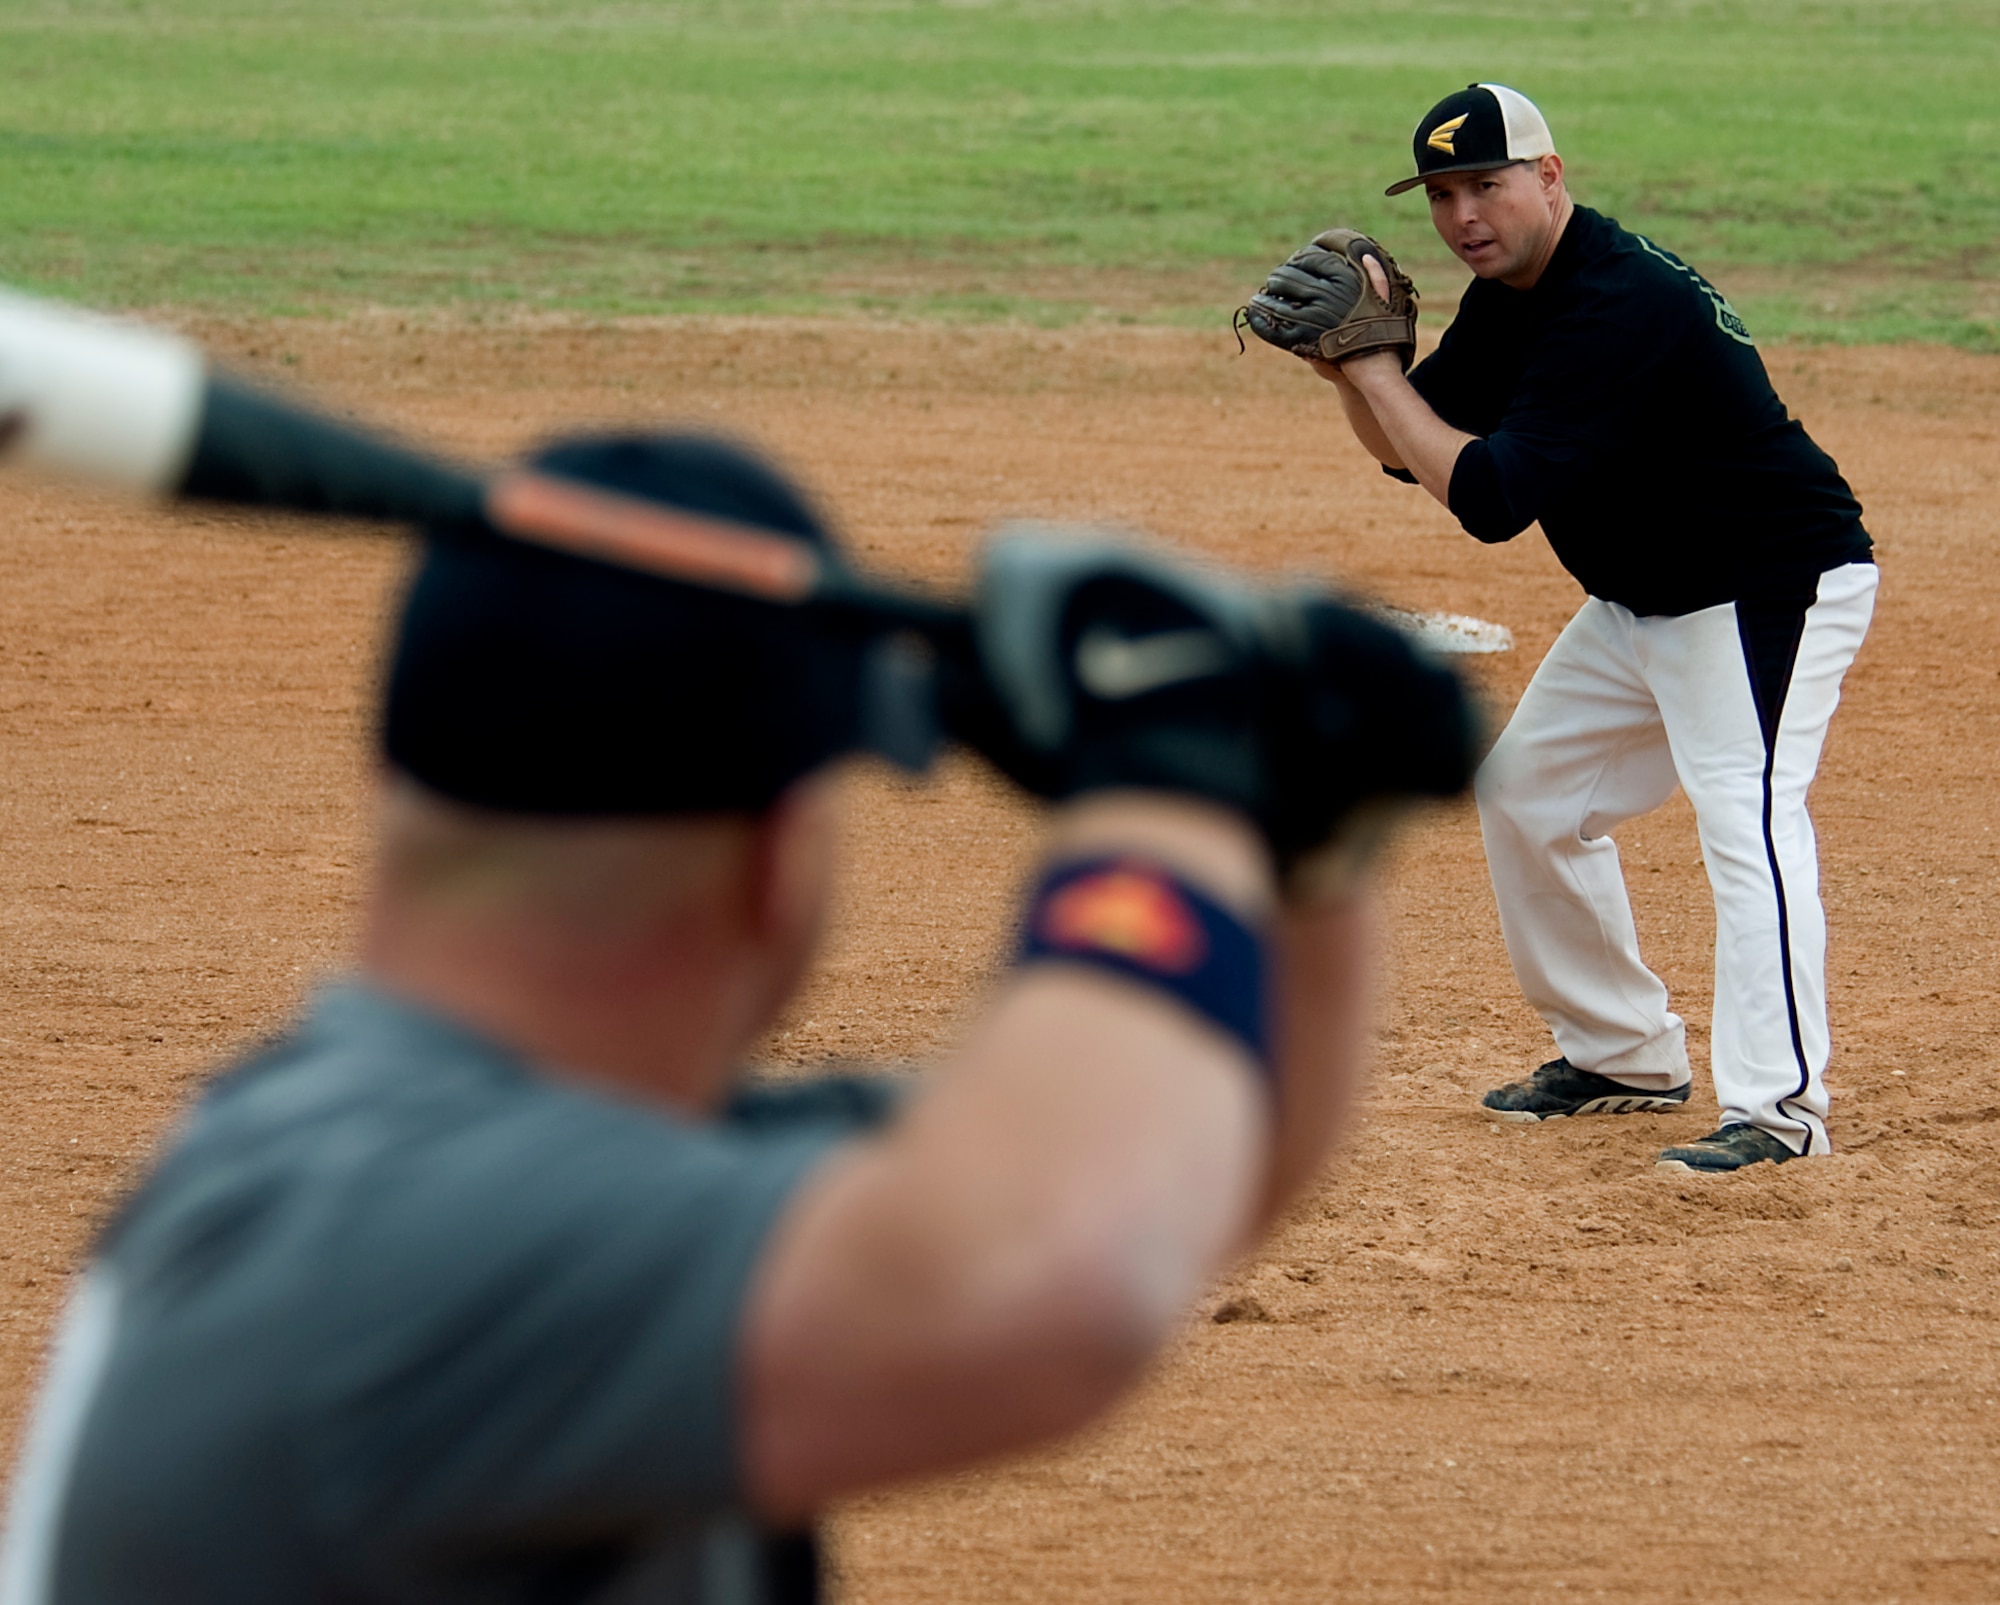 U.S. Air Force Master Sgt. Norman Dominguez, 7th Bomb Wing Director of Staff superintendent, pitches a softball May 13, 2014, at Dyess Air Force Base, Texas. Abilene Police Department played against the 7th Security Forces Squadron in honor of National Police Week.  In 1962, President John F. Kennedy designated the calendar week during which May 15 occurs be known as National Police Week. He also declared May 15 of each year Peace Officers Memorial Day. (U.S. Air Force photo by Senior Airman Peter Thompson/Released)